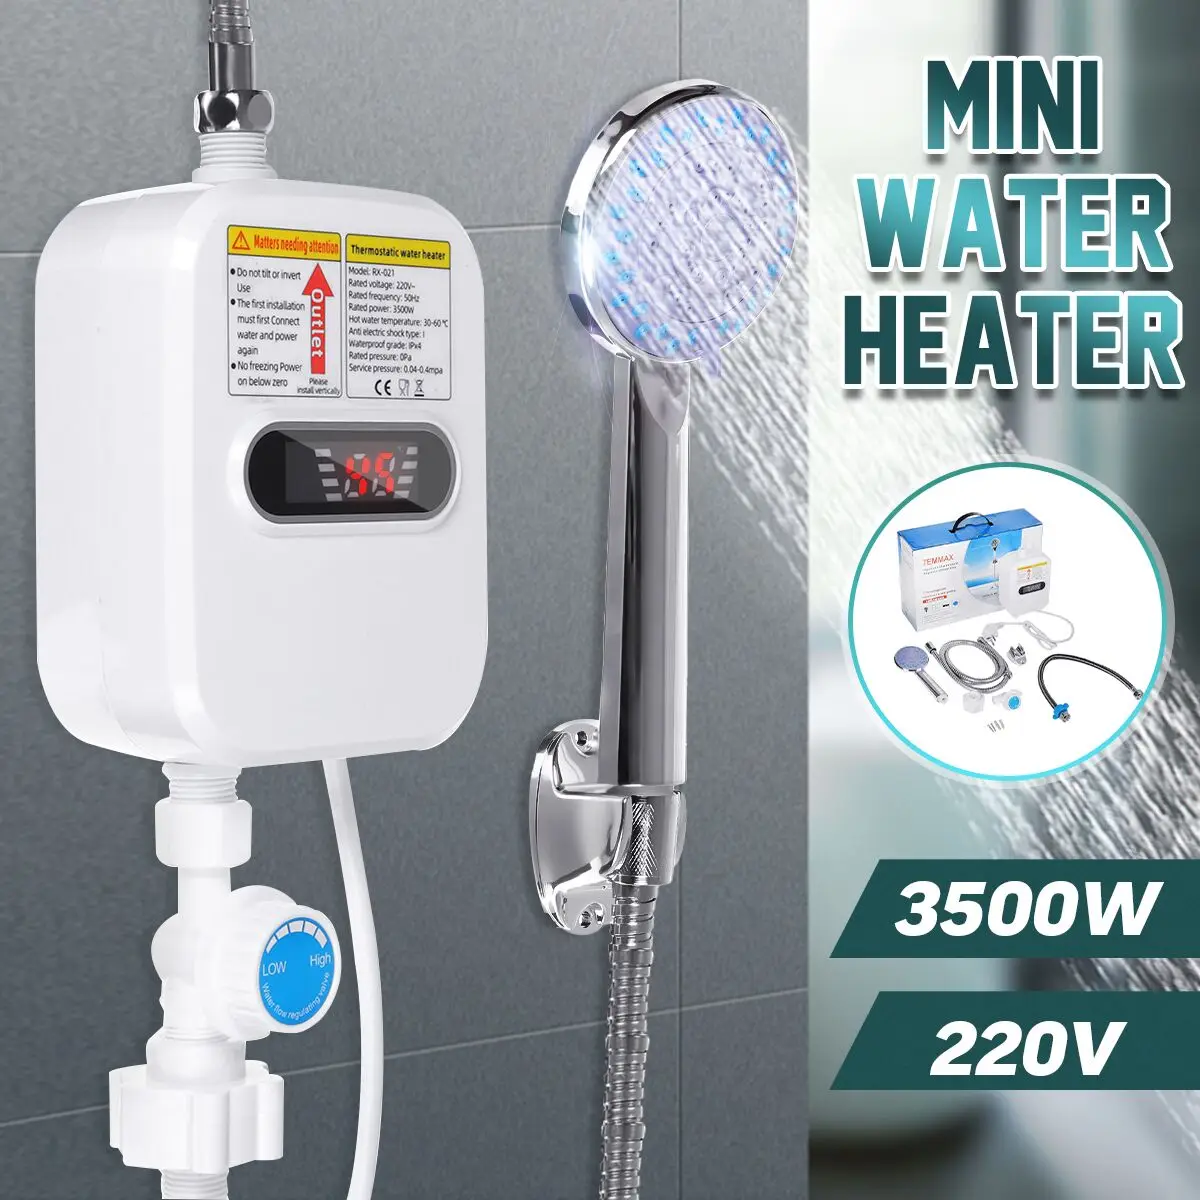 Instant Water Heater Shower 220V Bathroom Faucet EU Plug Hot Water Heater 3500W Digital Display For Country House Cottage Hotel